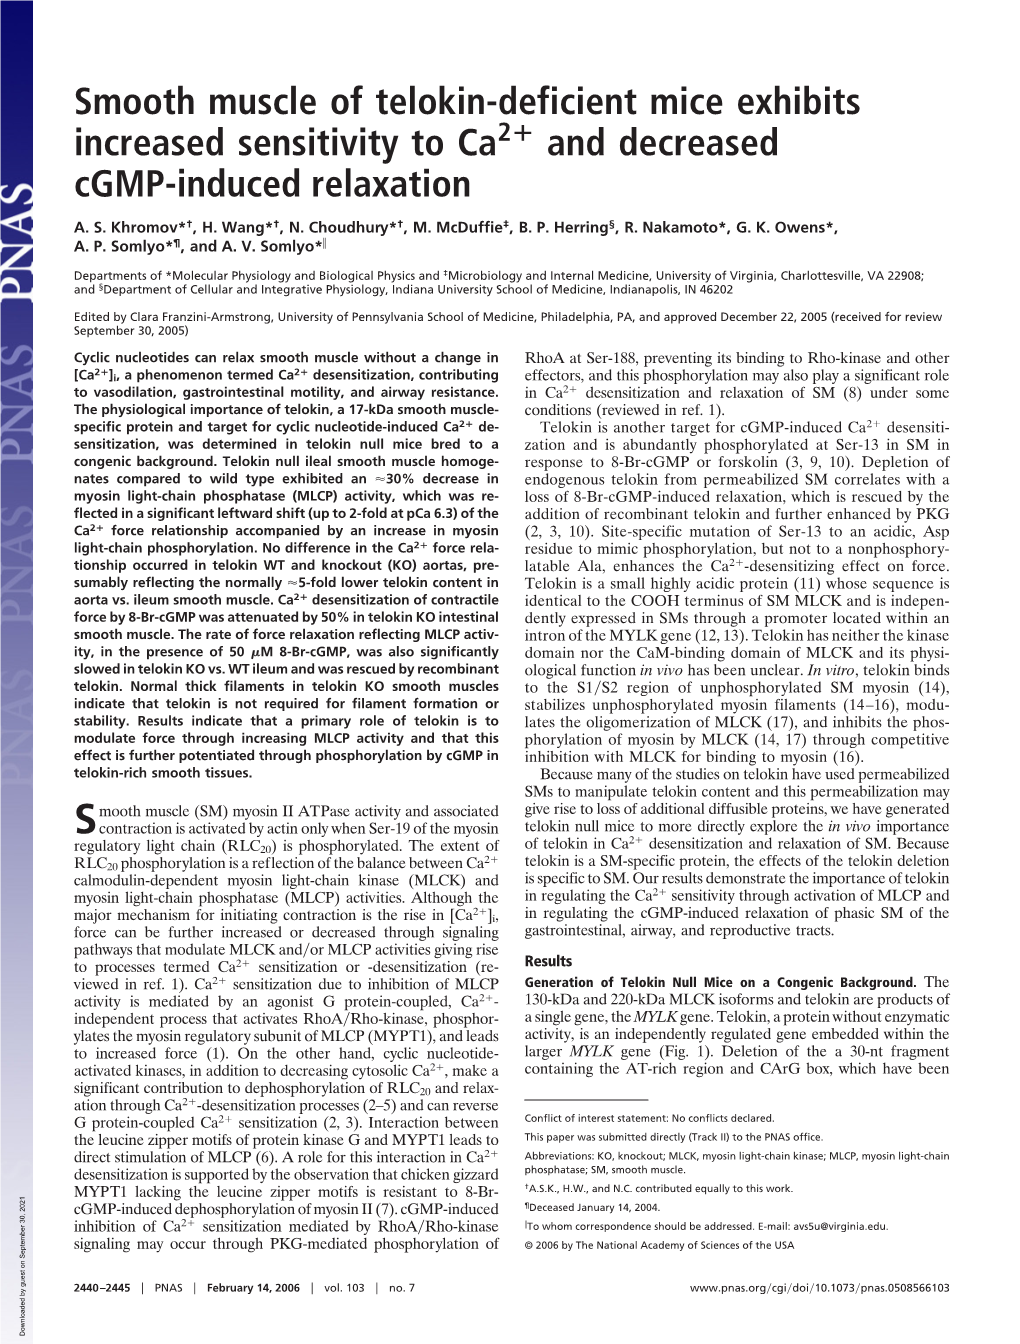 Smooth Muscle of Telokin-Deficient Mice Exhibits Increased Sensitivity to Ca2؉ and Decreased Cgmp-Induced Relaxation